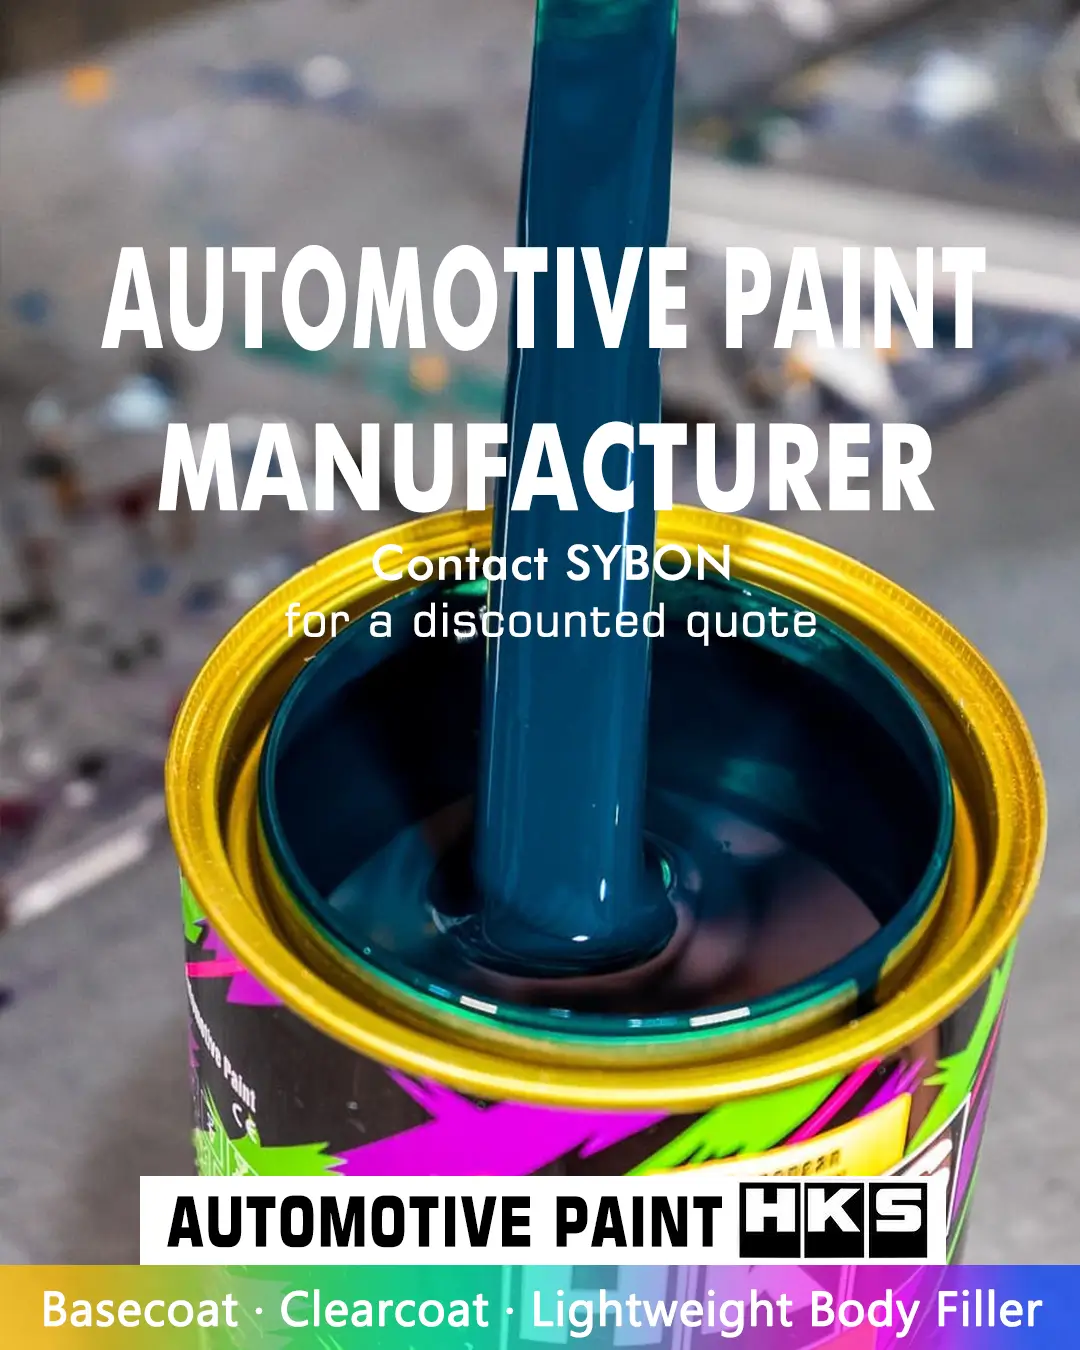 1700621625 Driving Success SYBONs Superior Autobody Paint Solutions at Competitive Prices–Seeking Distributor Partnerships